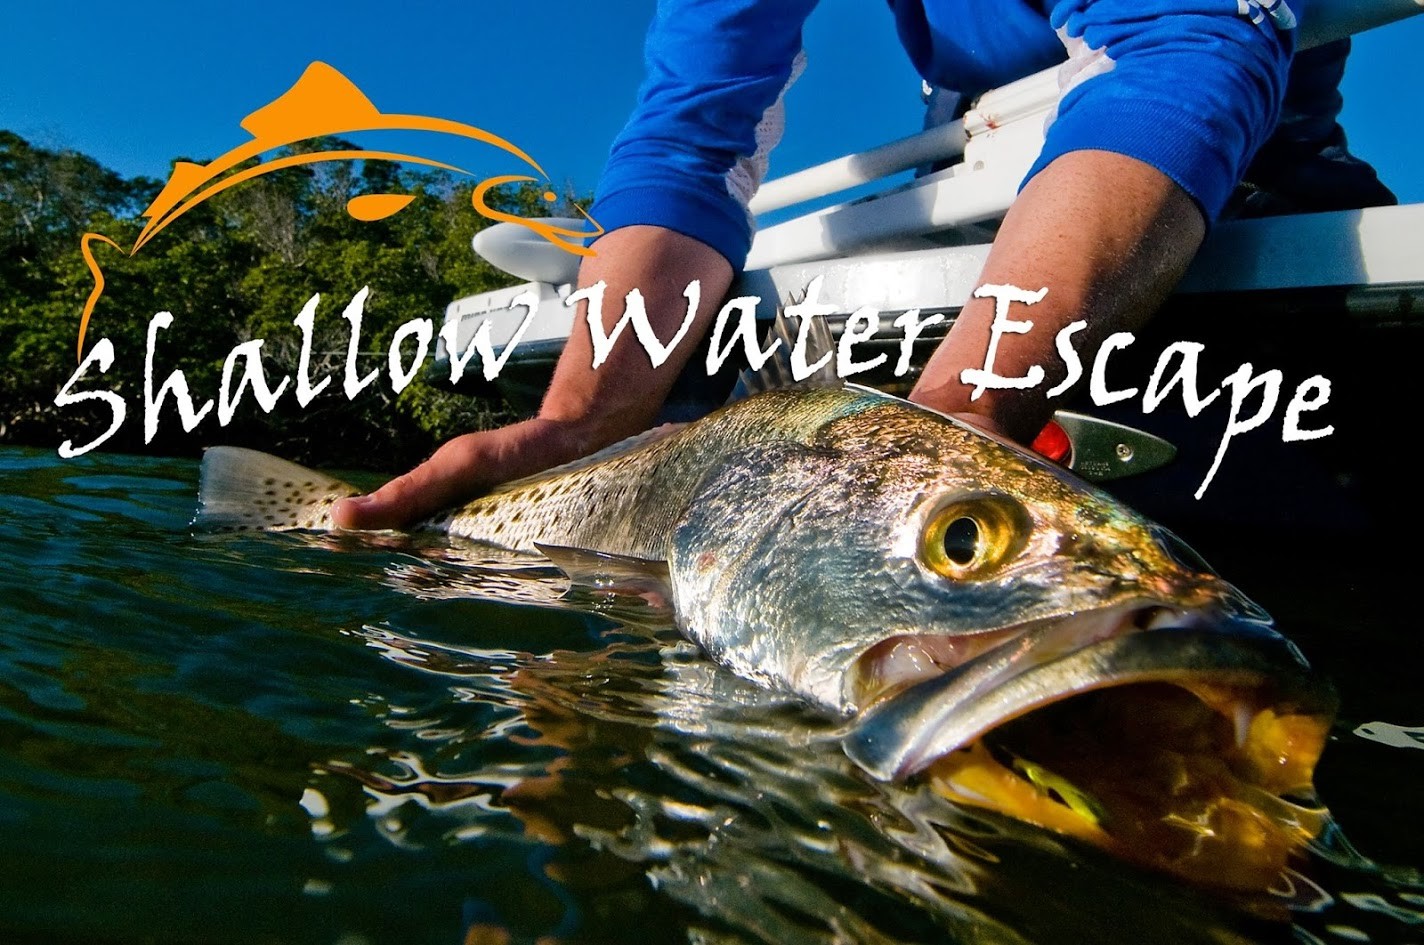 Shallow Water Escape: Half Day Inshore Fishing